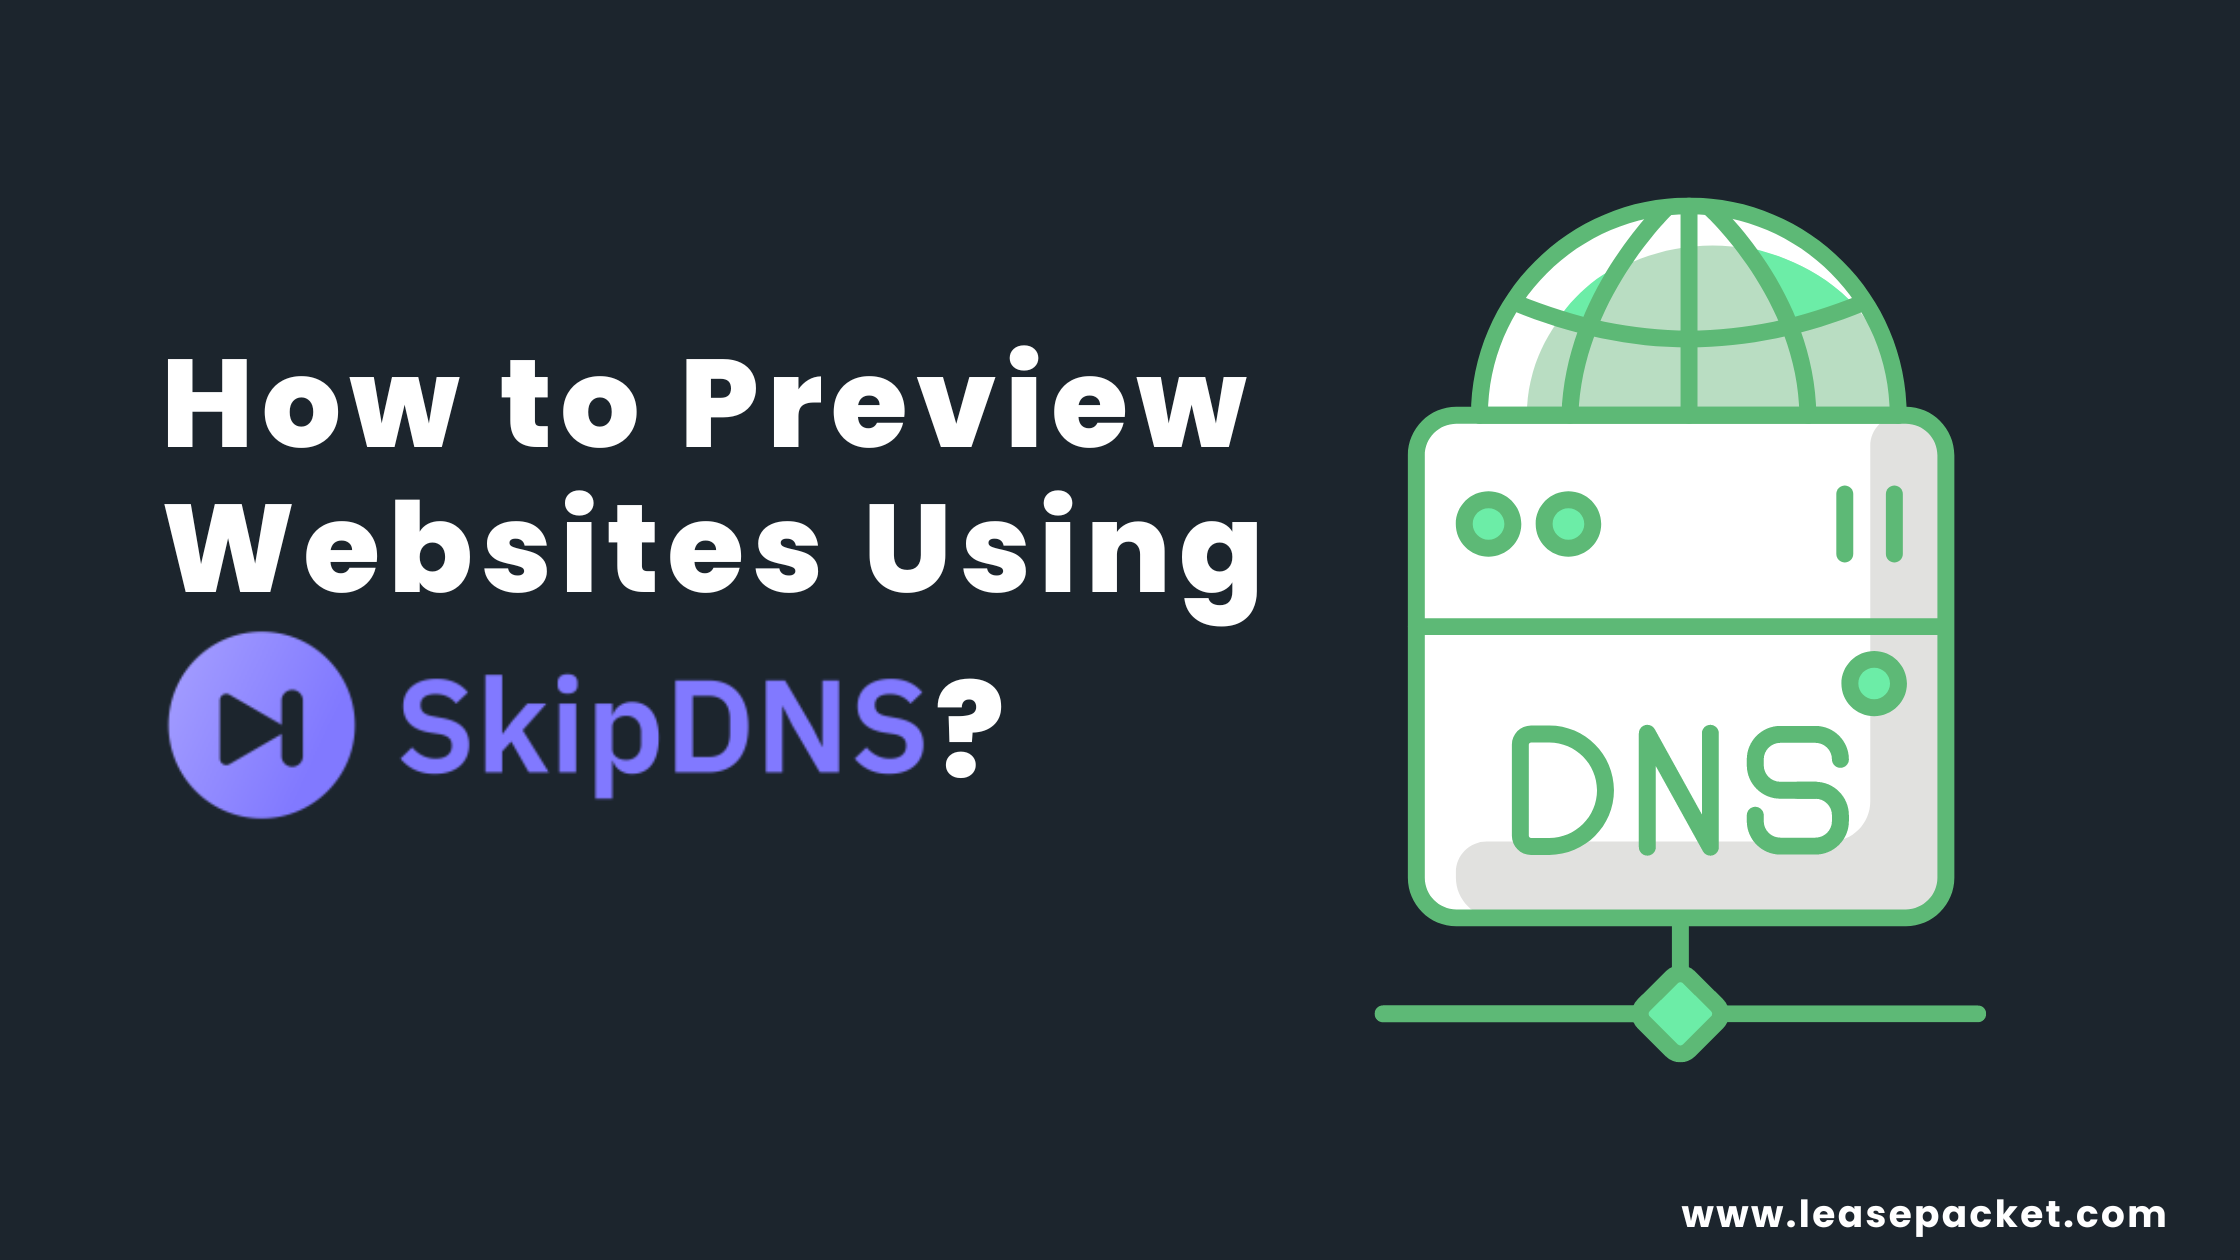 You are currently viewing How to Preview Websites Using SkipDNS?